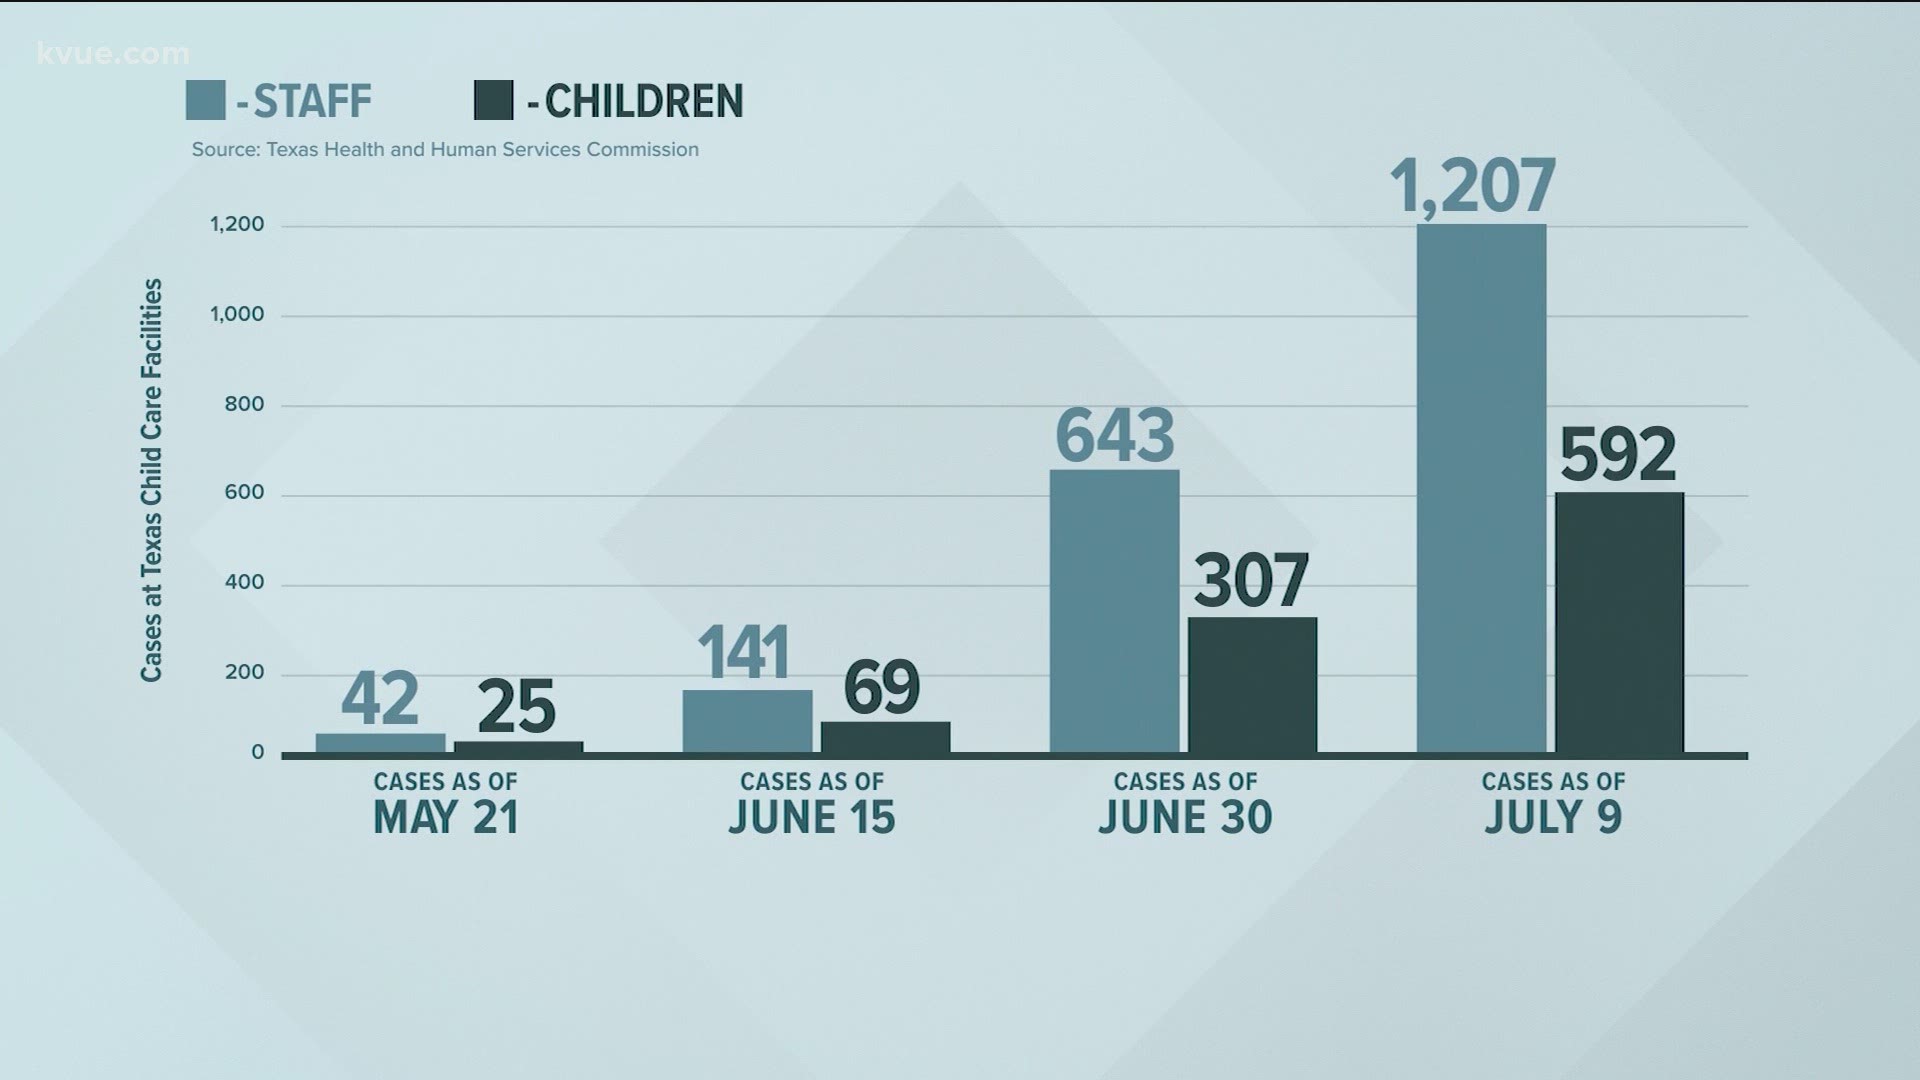 As of Wednesday, more than 1,200 of those cases were staff members and more than 500 were children, according to the Texas Health and Human Services Commission.